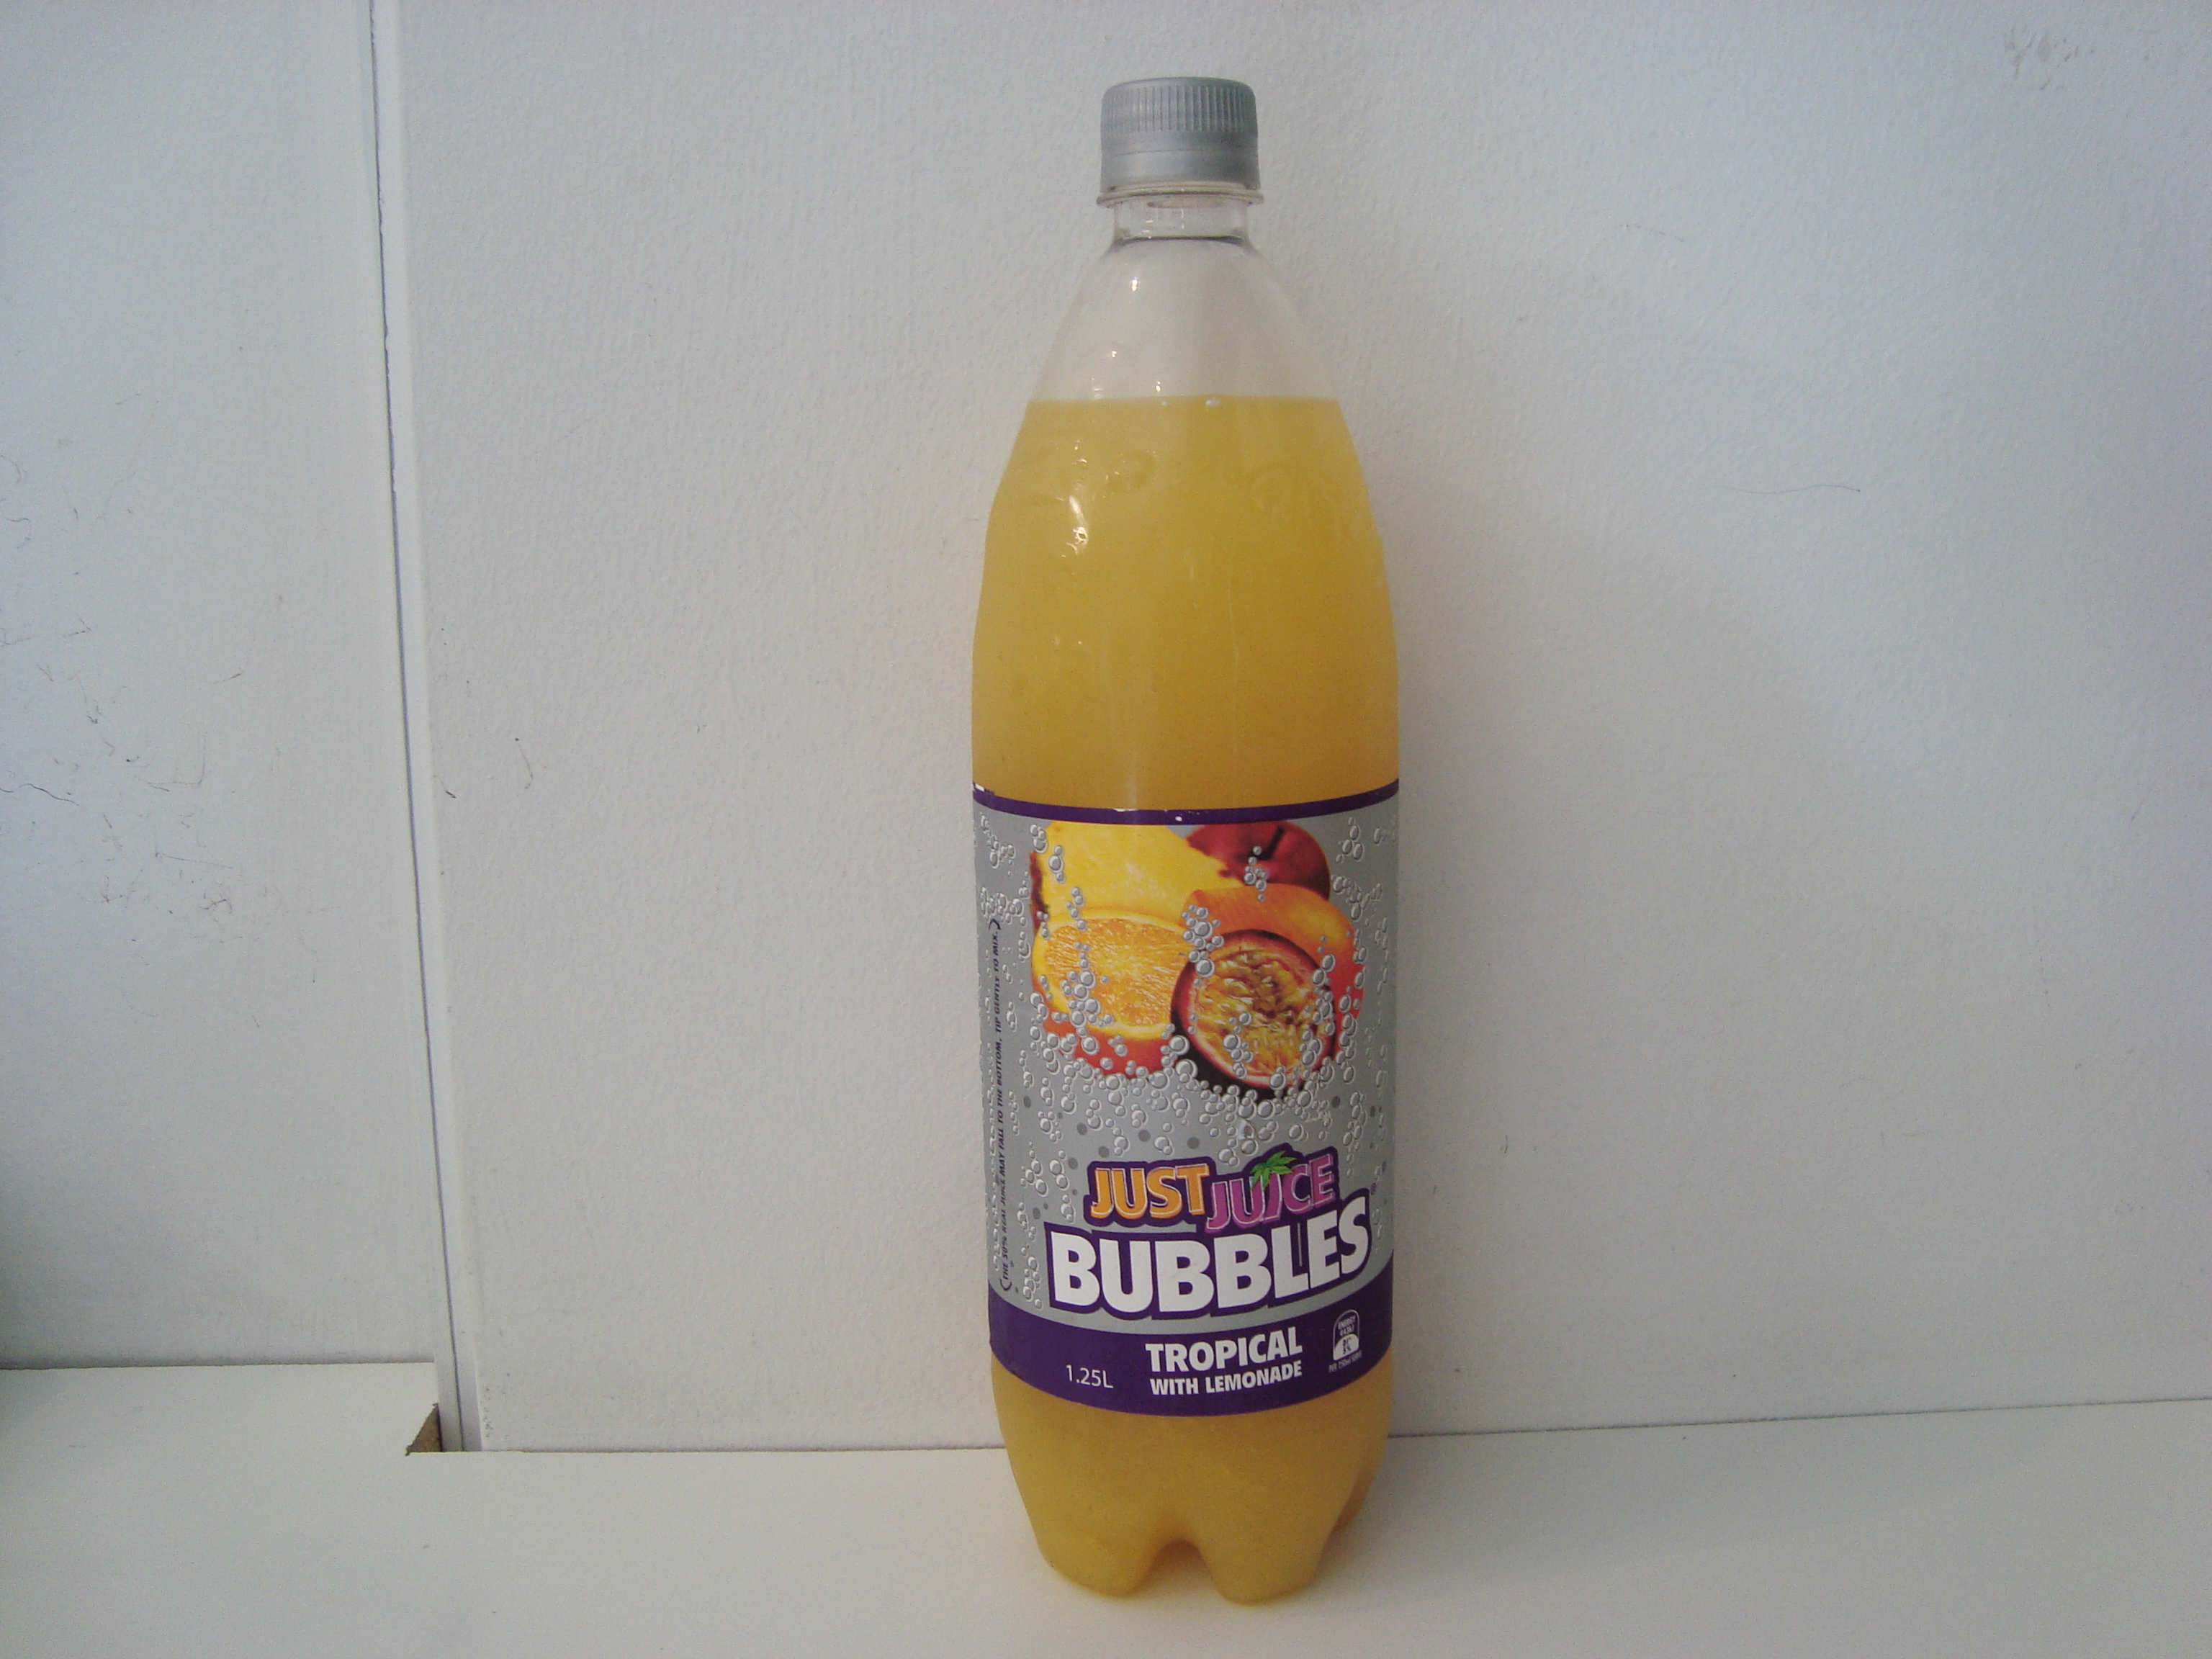 Just Juice Bubbles Tropical with Lemonade 1.25L not available